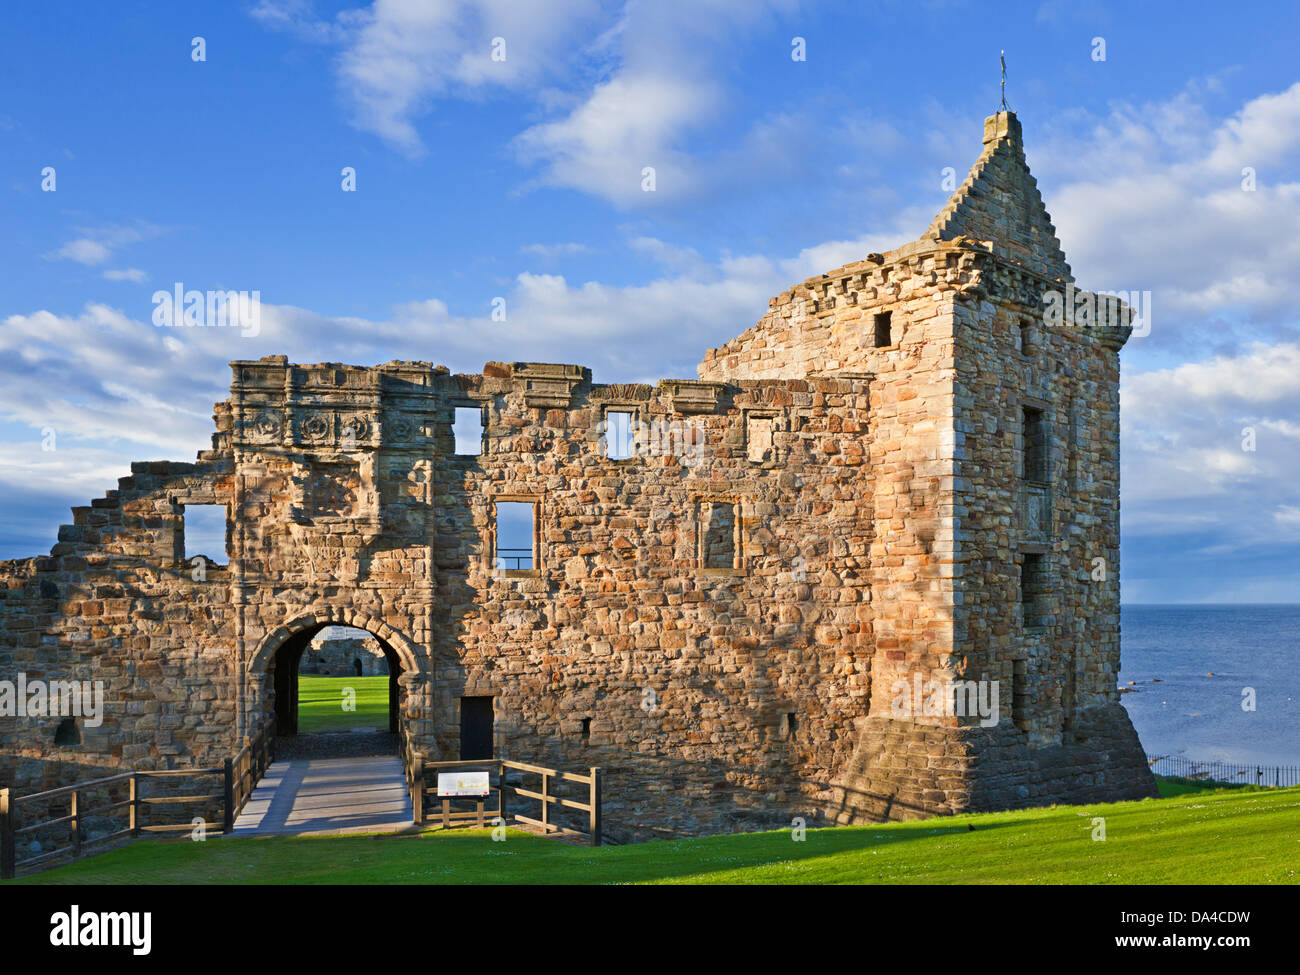 St Andrews Scotland St Andrews Castle a picturesque ruin in the coastal Royal Burgh of St Andrews Fife Scotland UK GB Europe Stock Photo